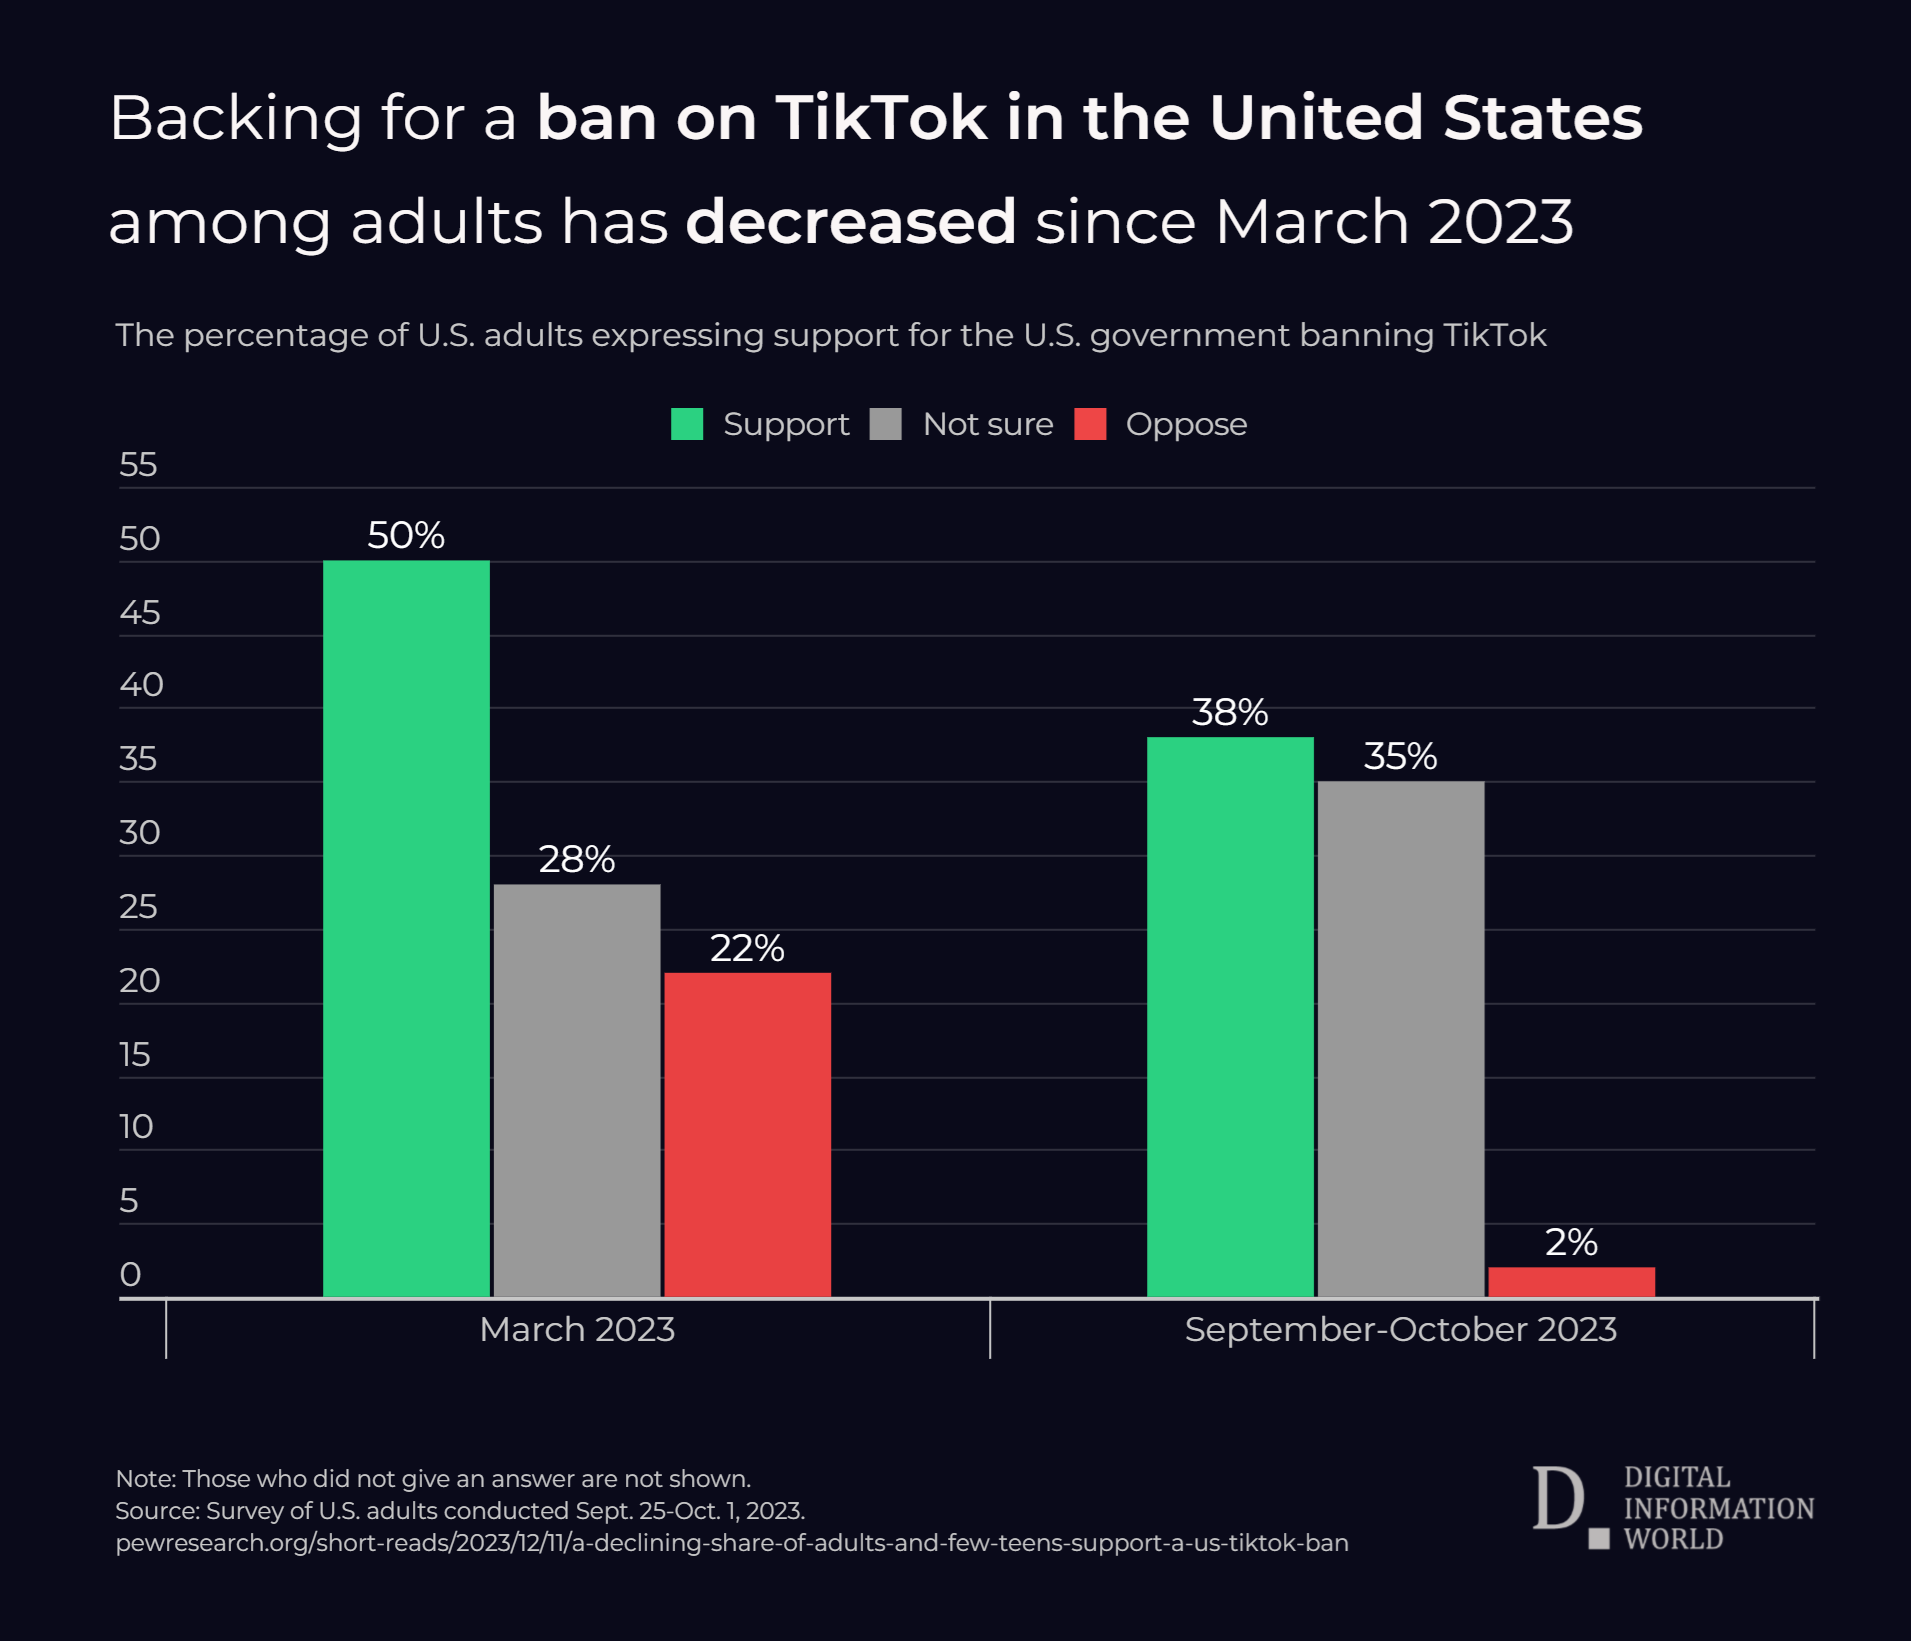 Backing for a ban on TikTok in the United States among adults has decreased since March 2023